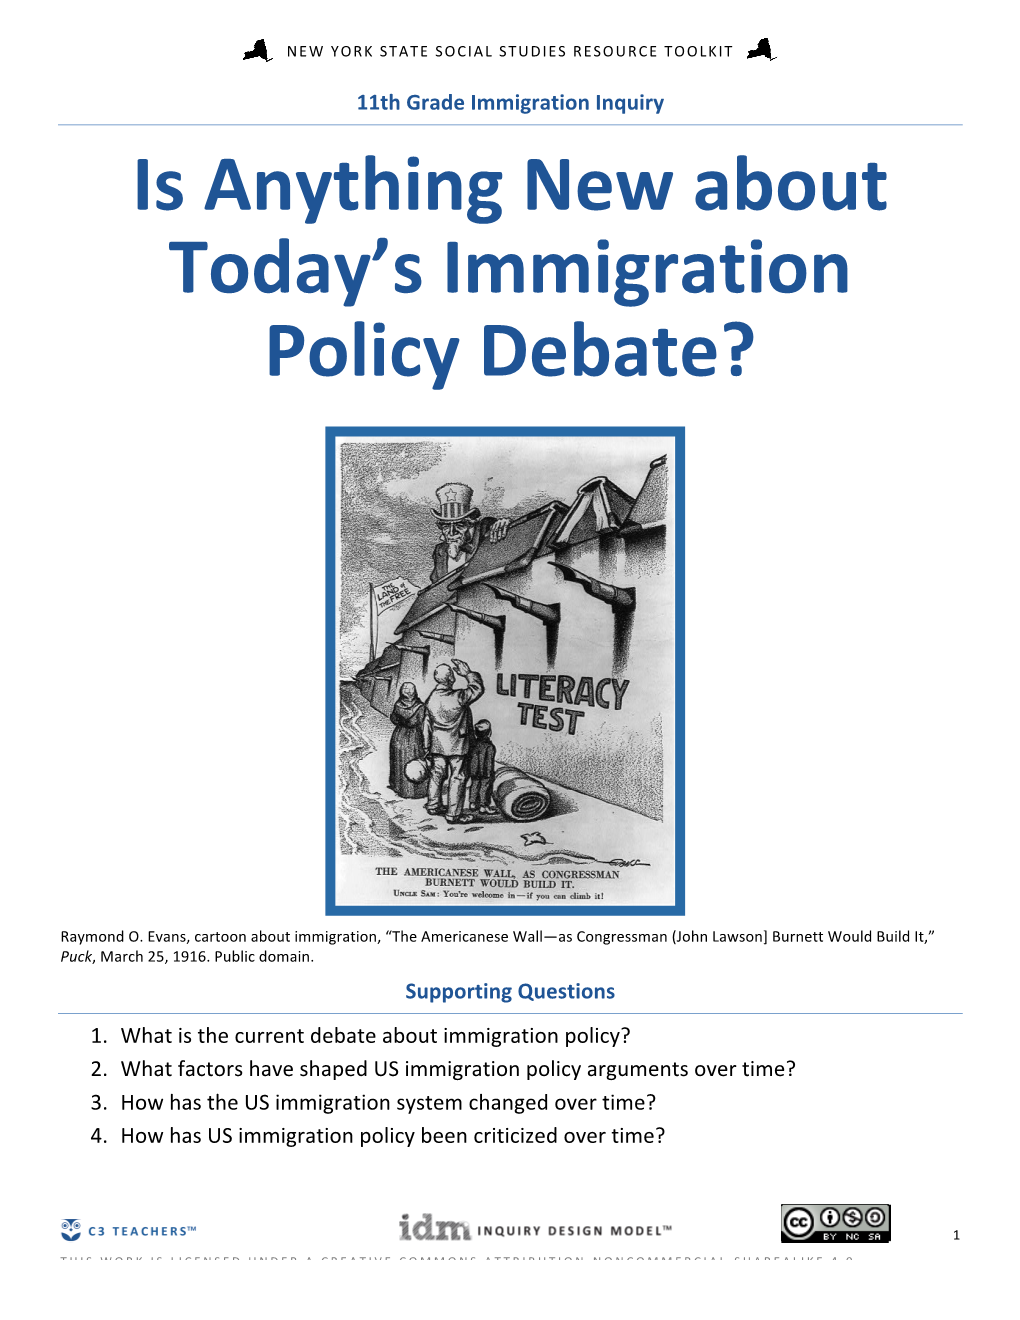 Is Anything New About Today's Immigration Policy Debate?